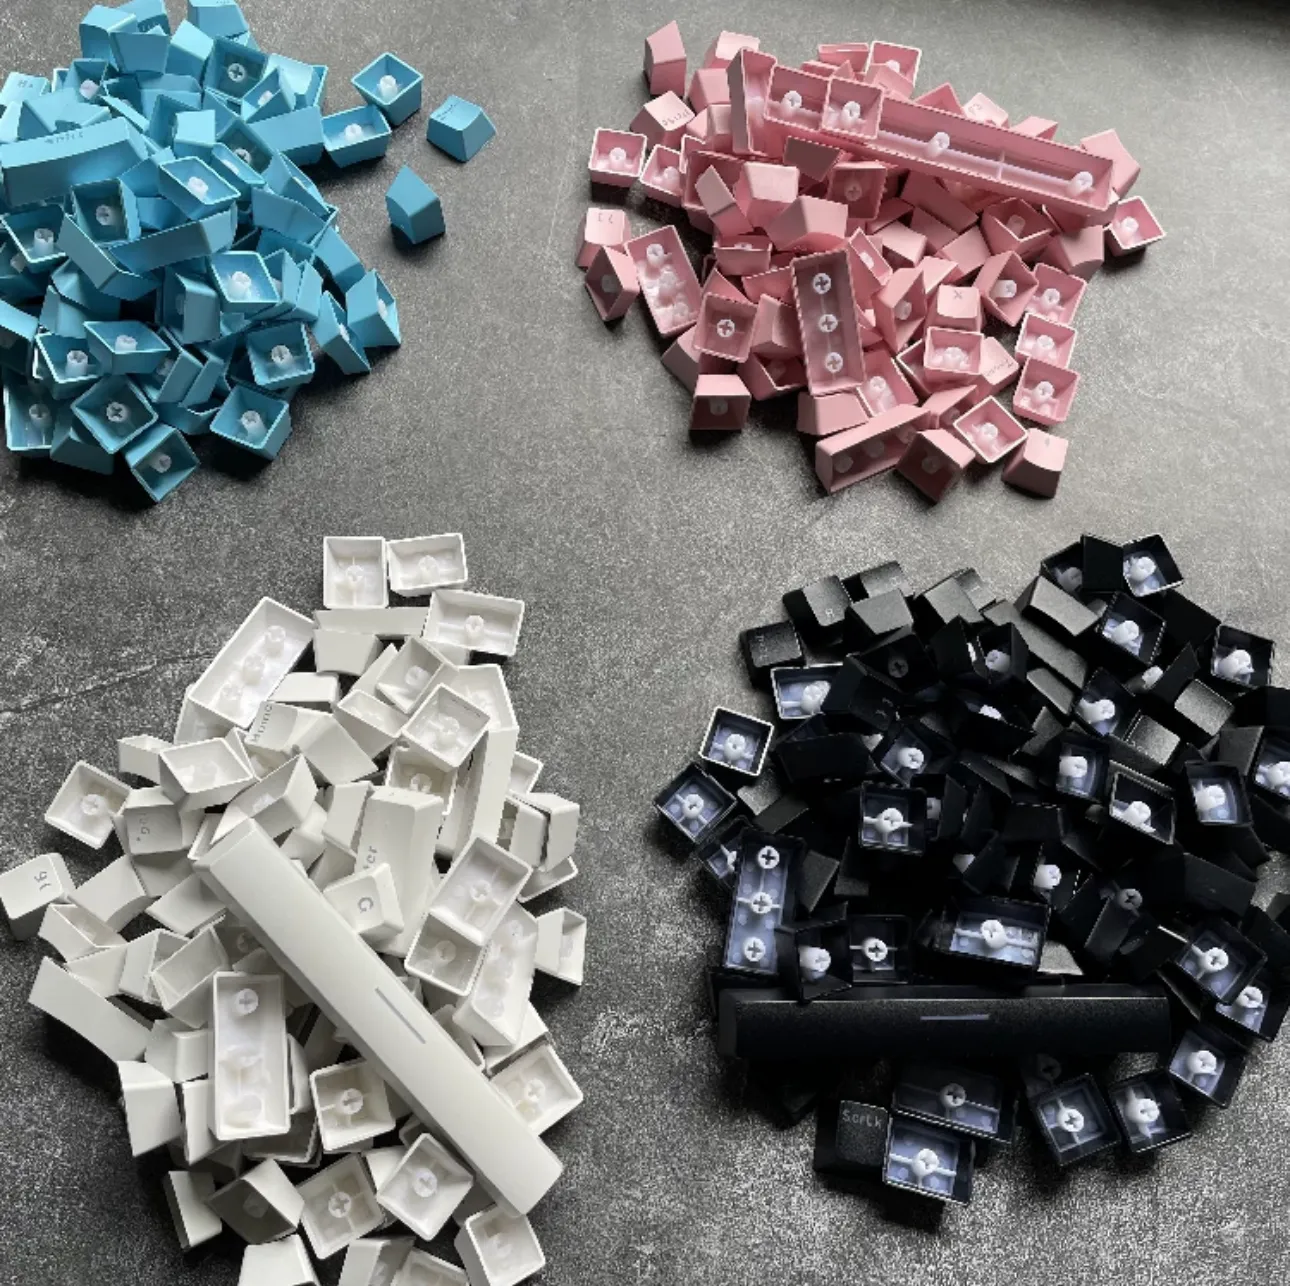 Aluminum products for individual keycaps on CNC keyboards